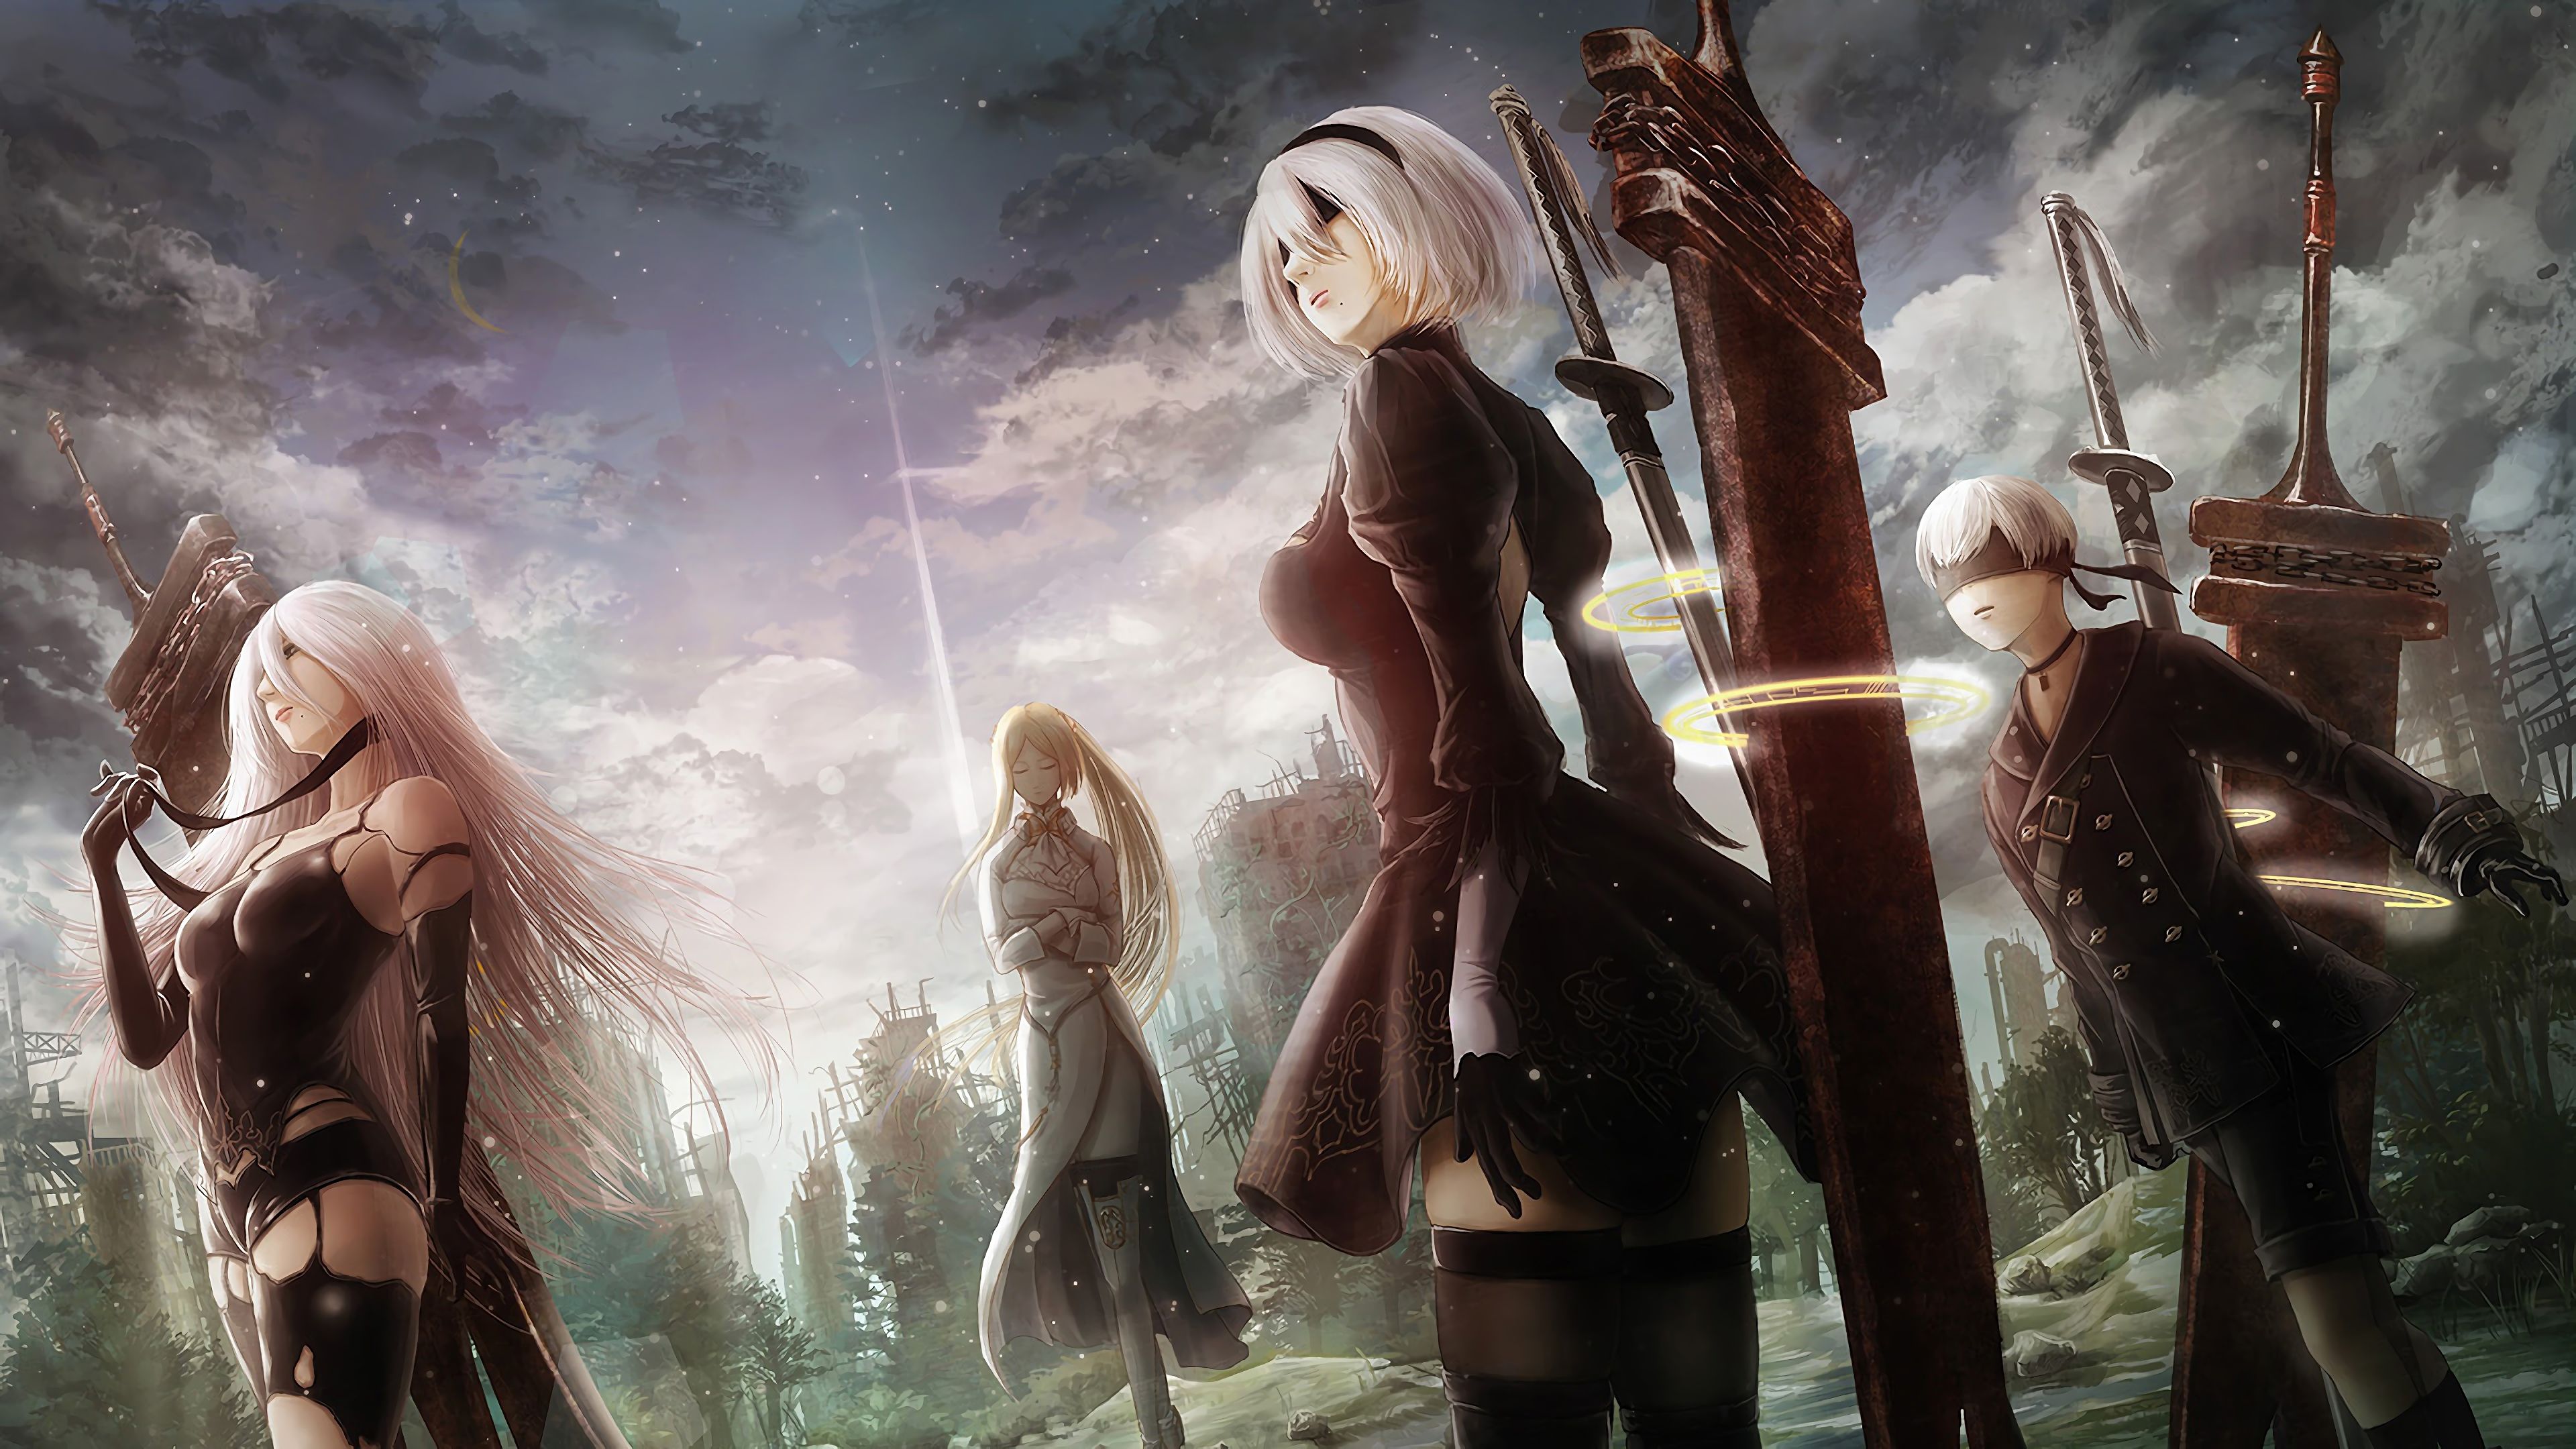 download nier automata ps4 for free